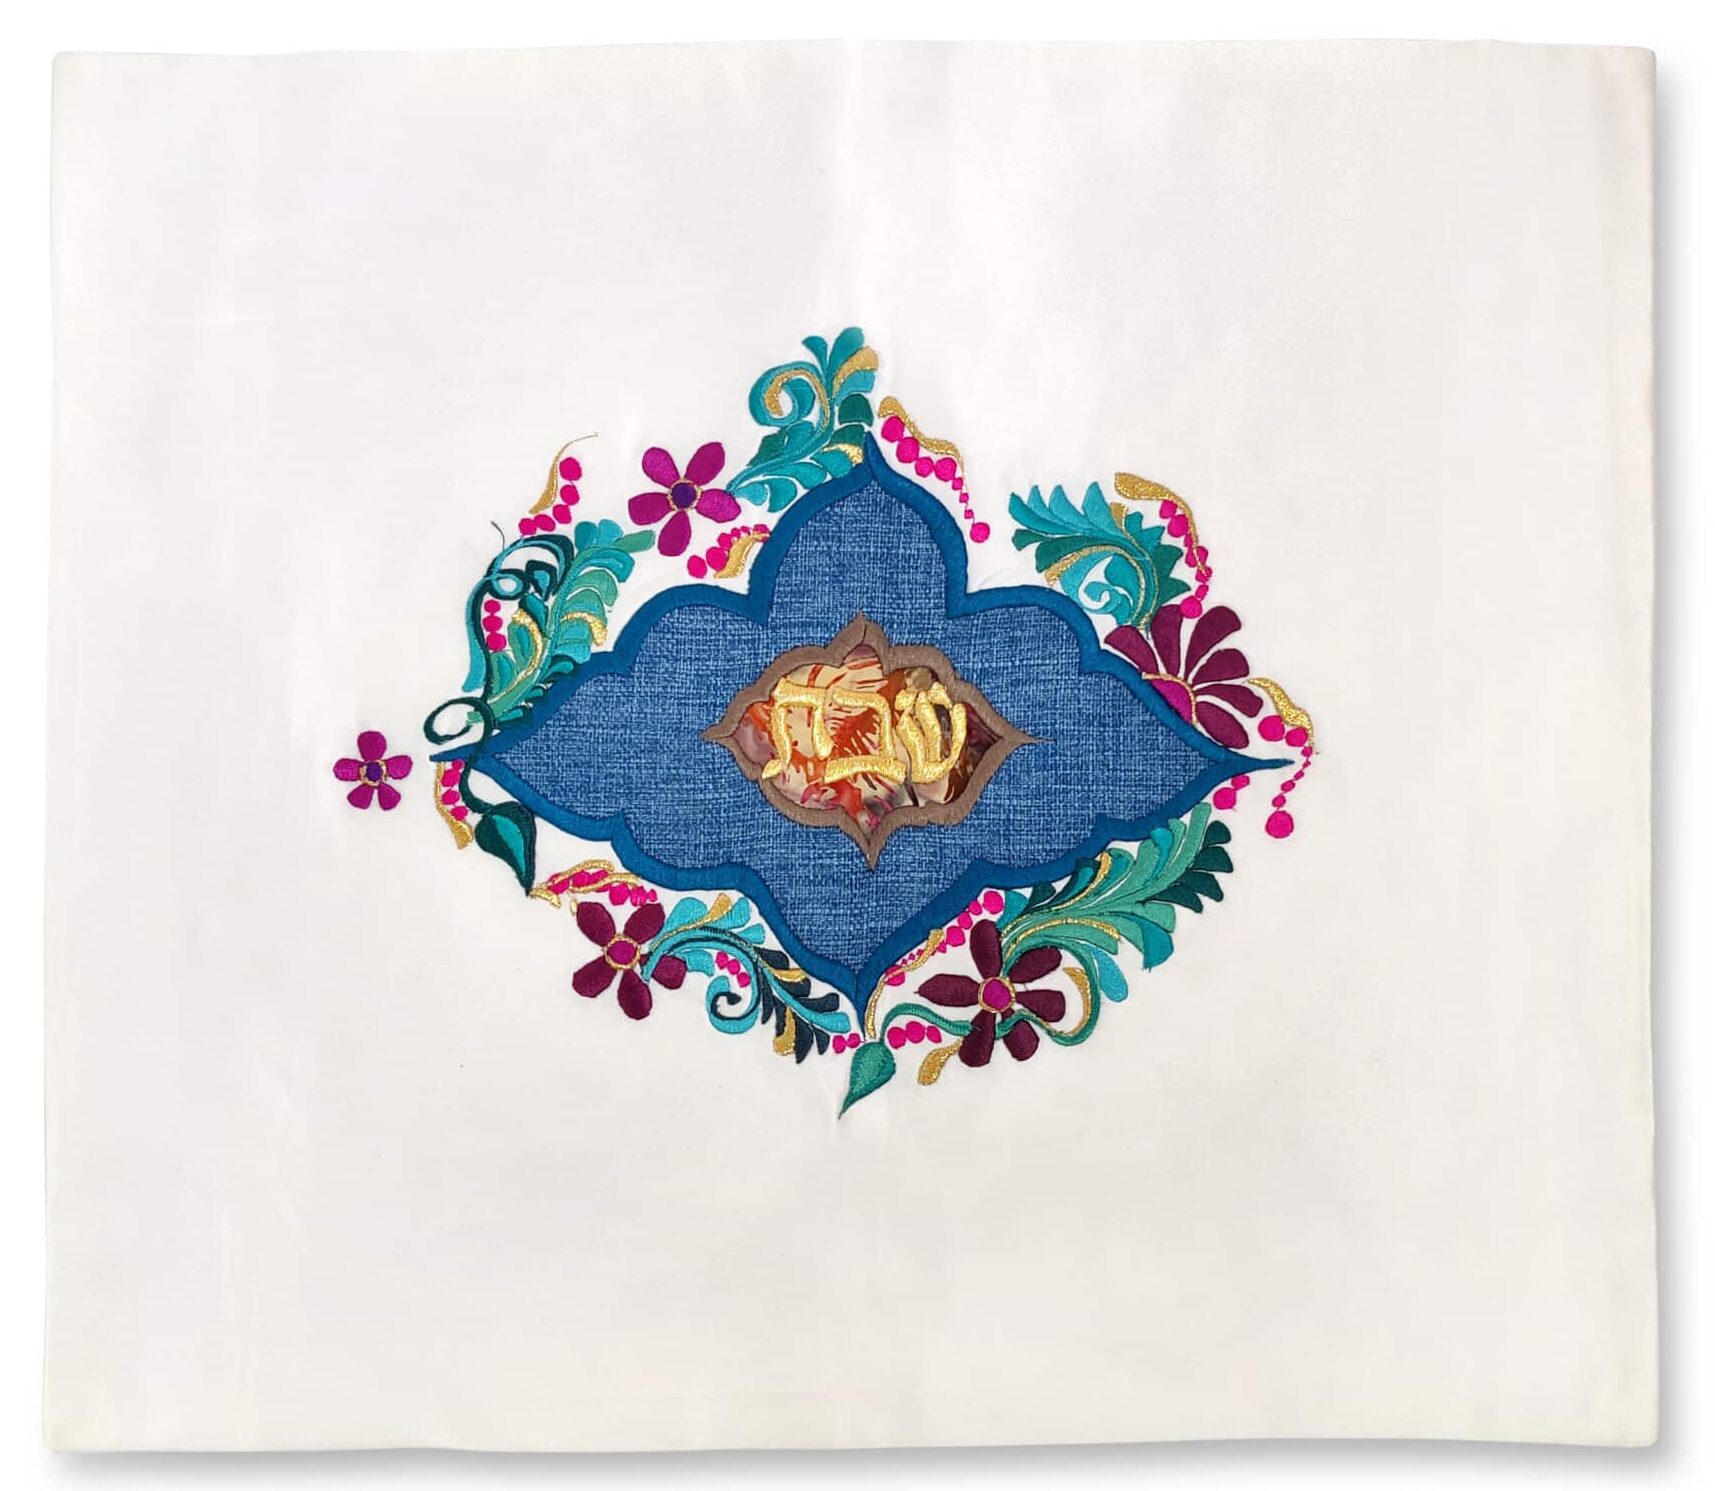 Challah Cover with handmade Flower Stitching